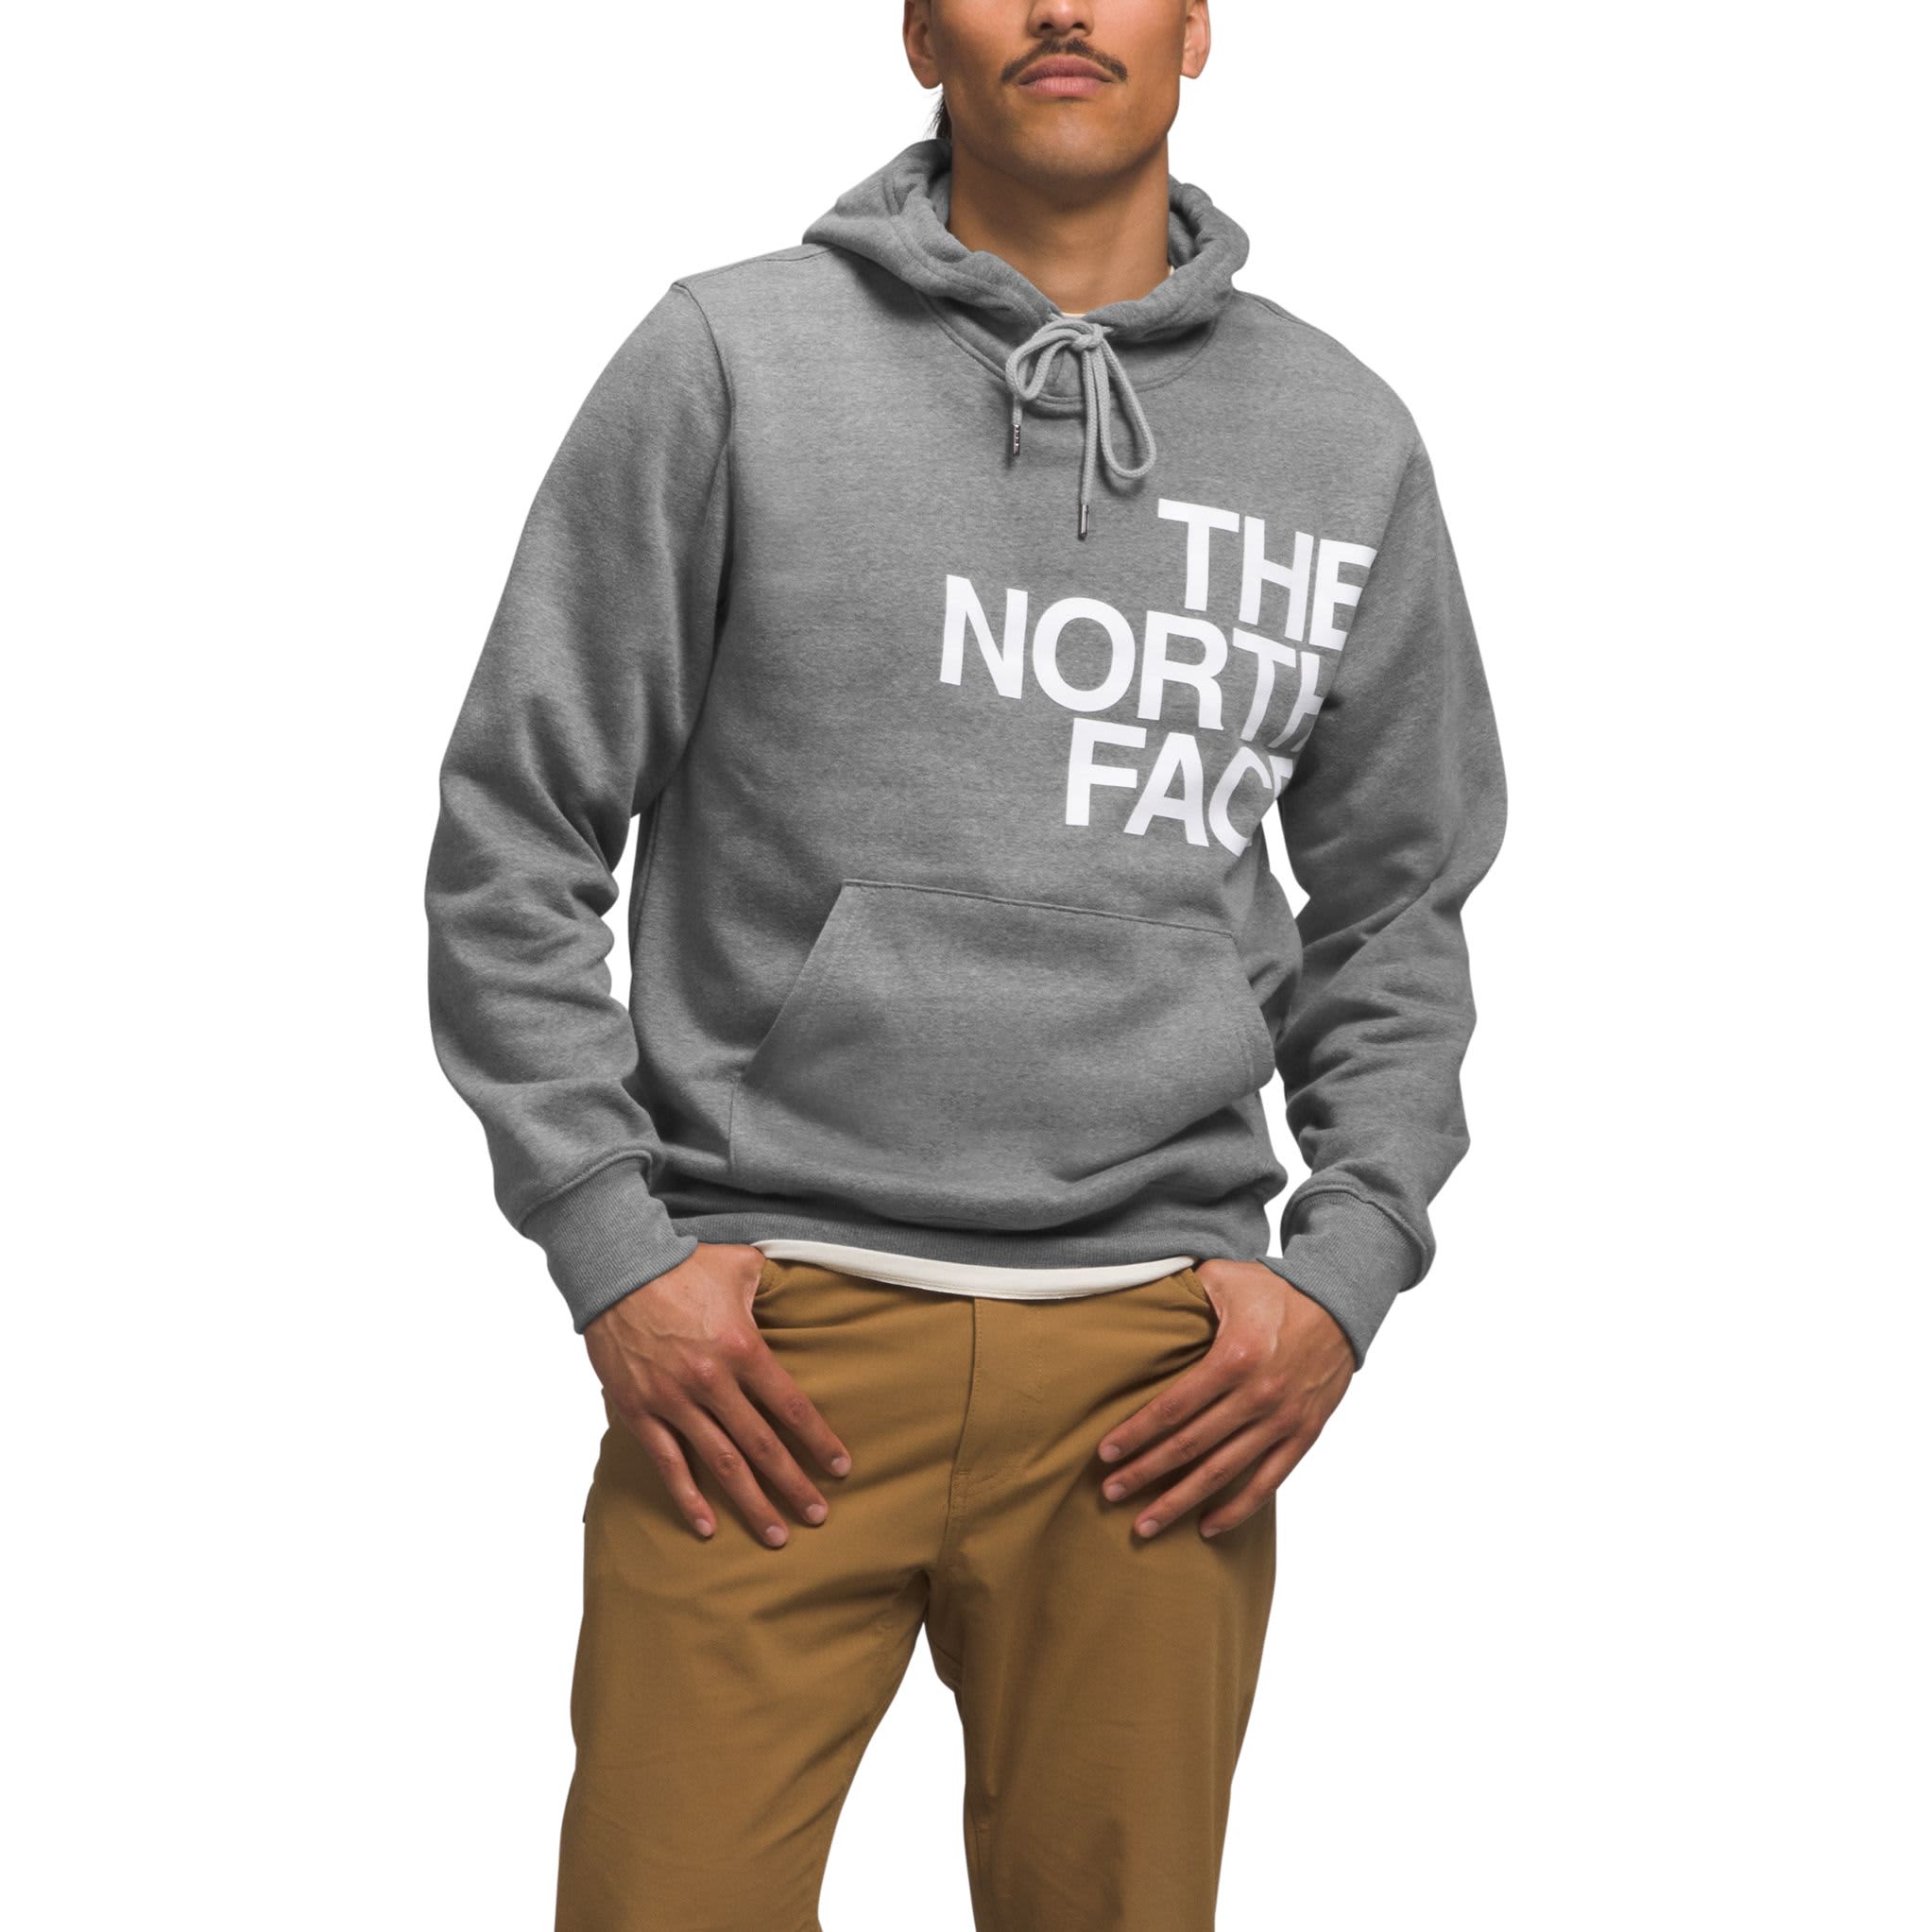 The North Face® Men’s Brand Proud Hoodie